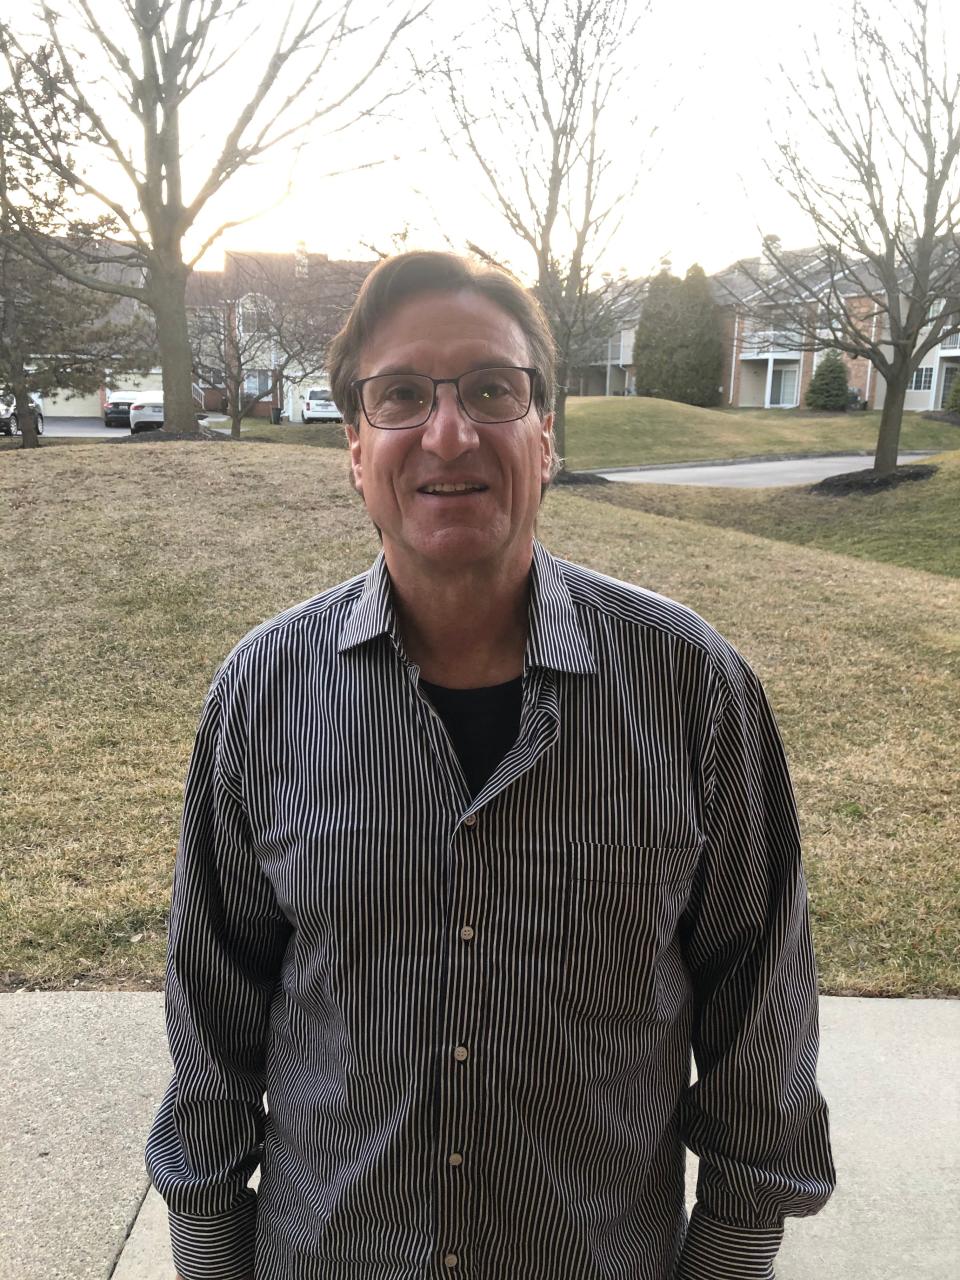 Randy Smith, 59, is a ticket re-seller who lost his line of work in March as big name artists canceled or postponed blockbuster concerts amidst the coronavirus crisis. He knows his retirement savings has seen big losses, too, after the market meltdown associated with the coronavirus fears.